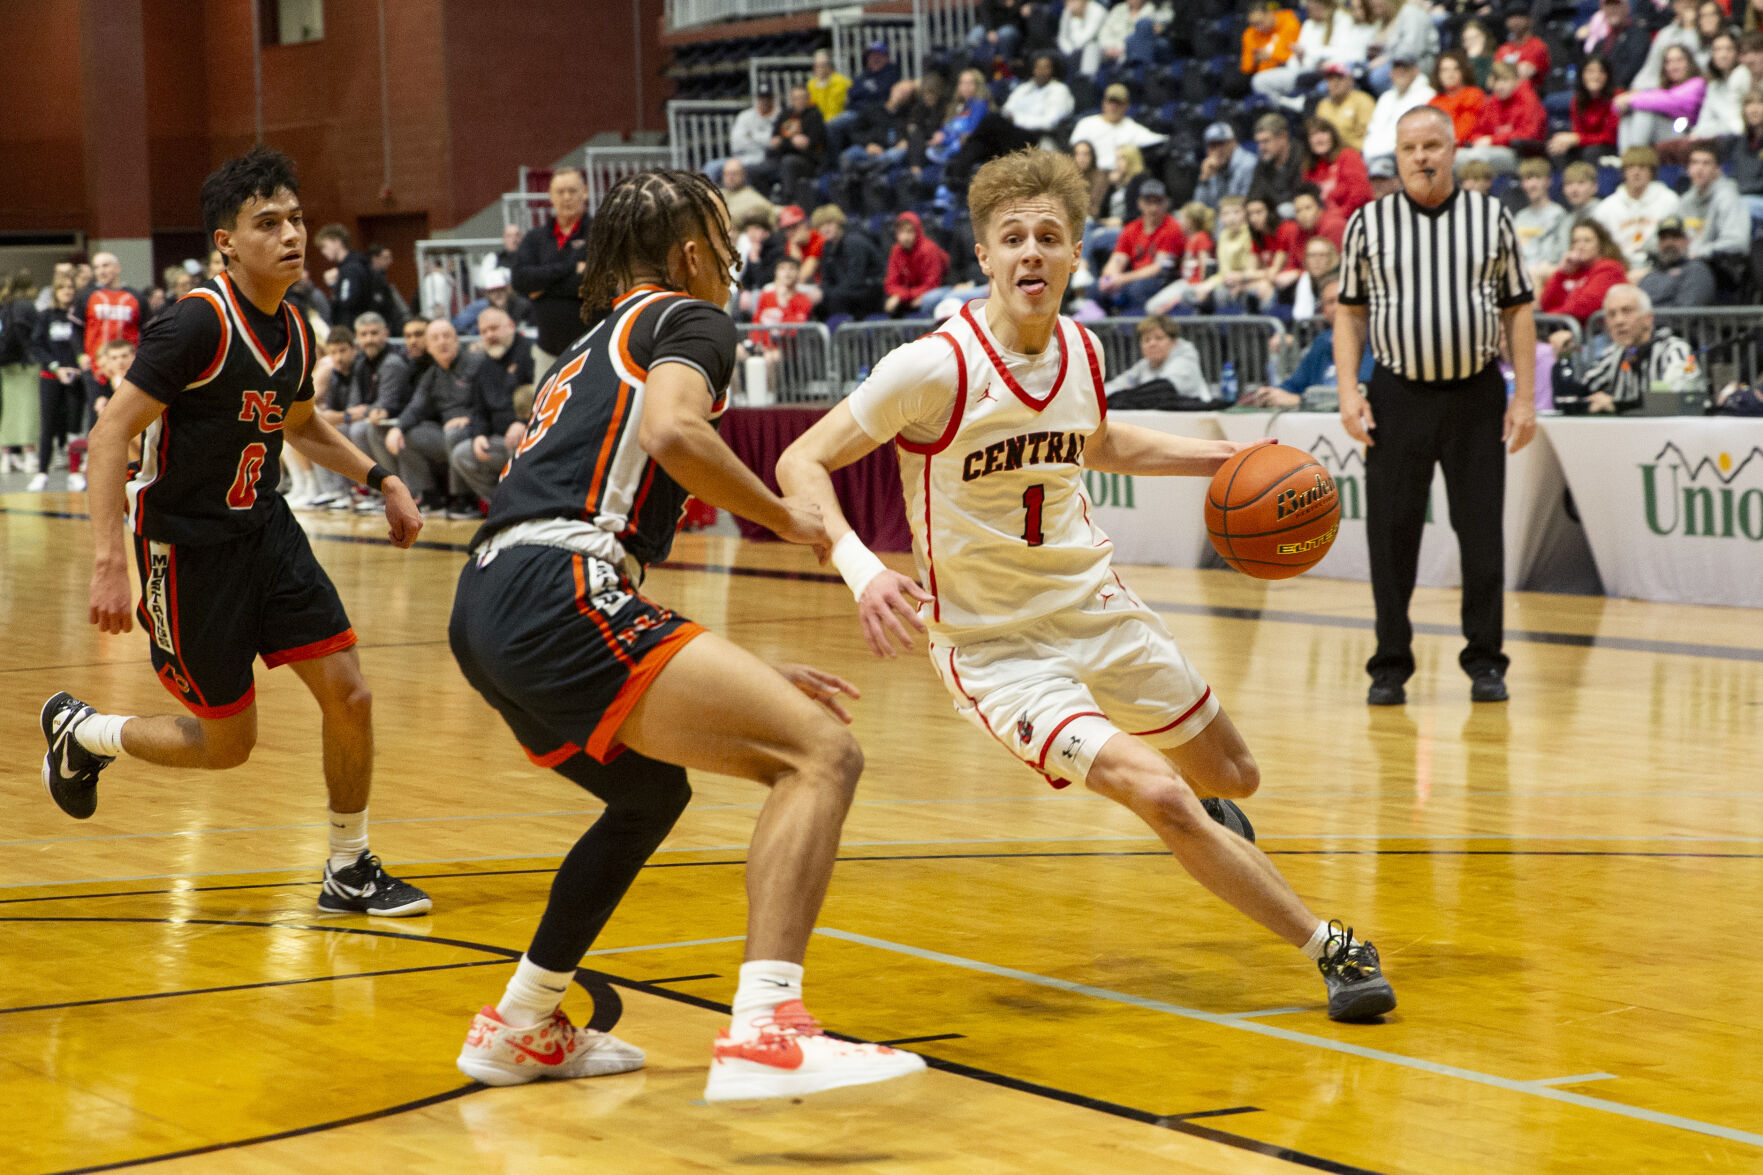 Shumway shines with 28 points as Cheyenne Central outplays Natrona County